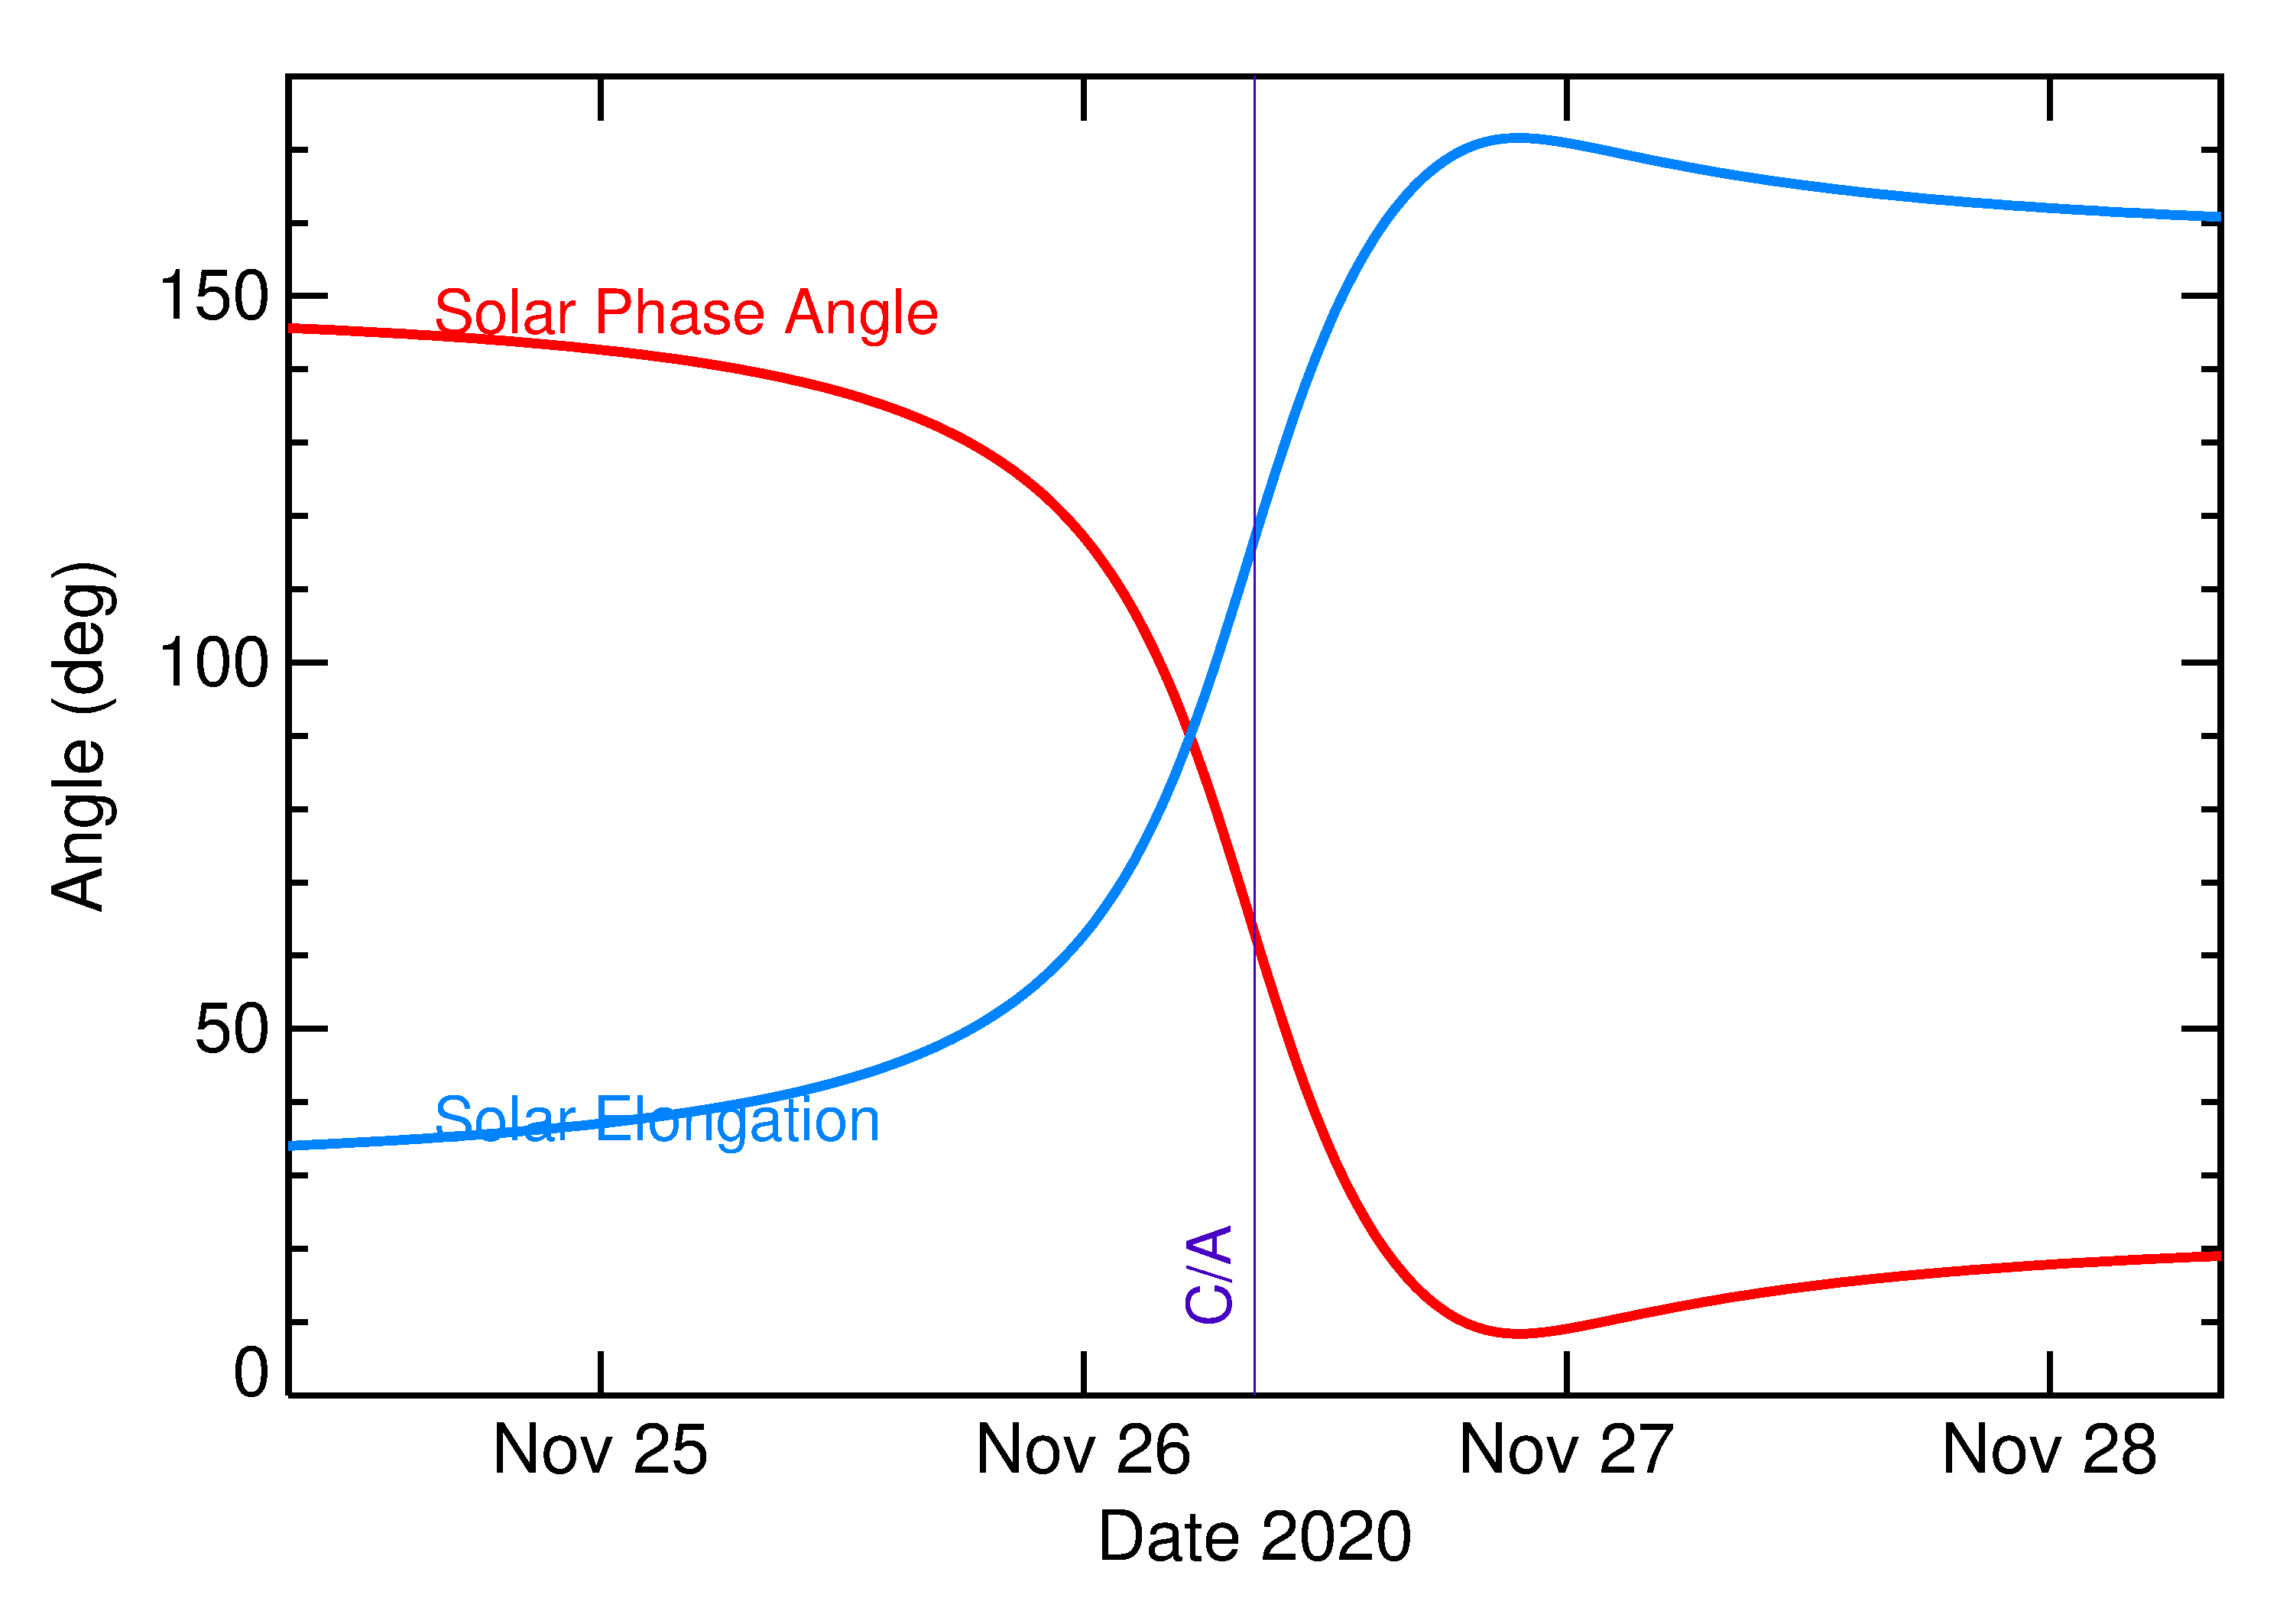 Solar Elongation and Solar Phase Angle of 2020 WF5 in the days around closest approach